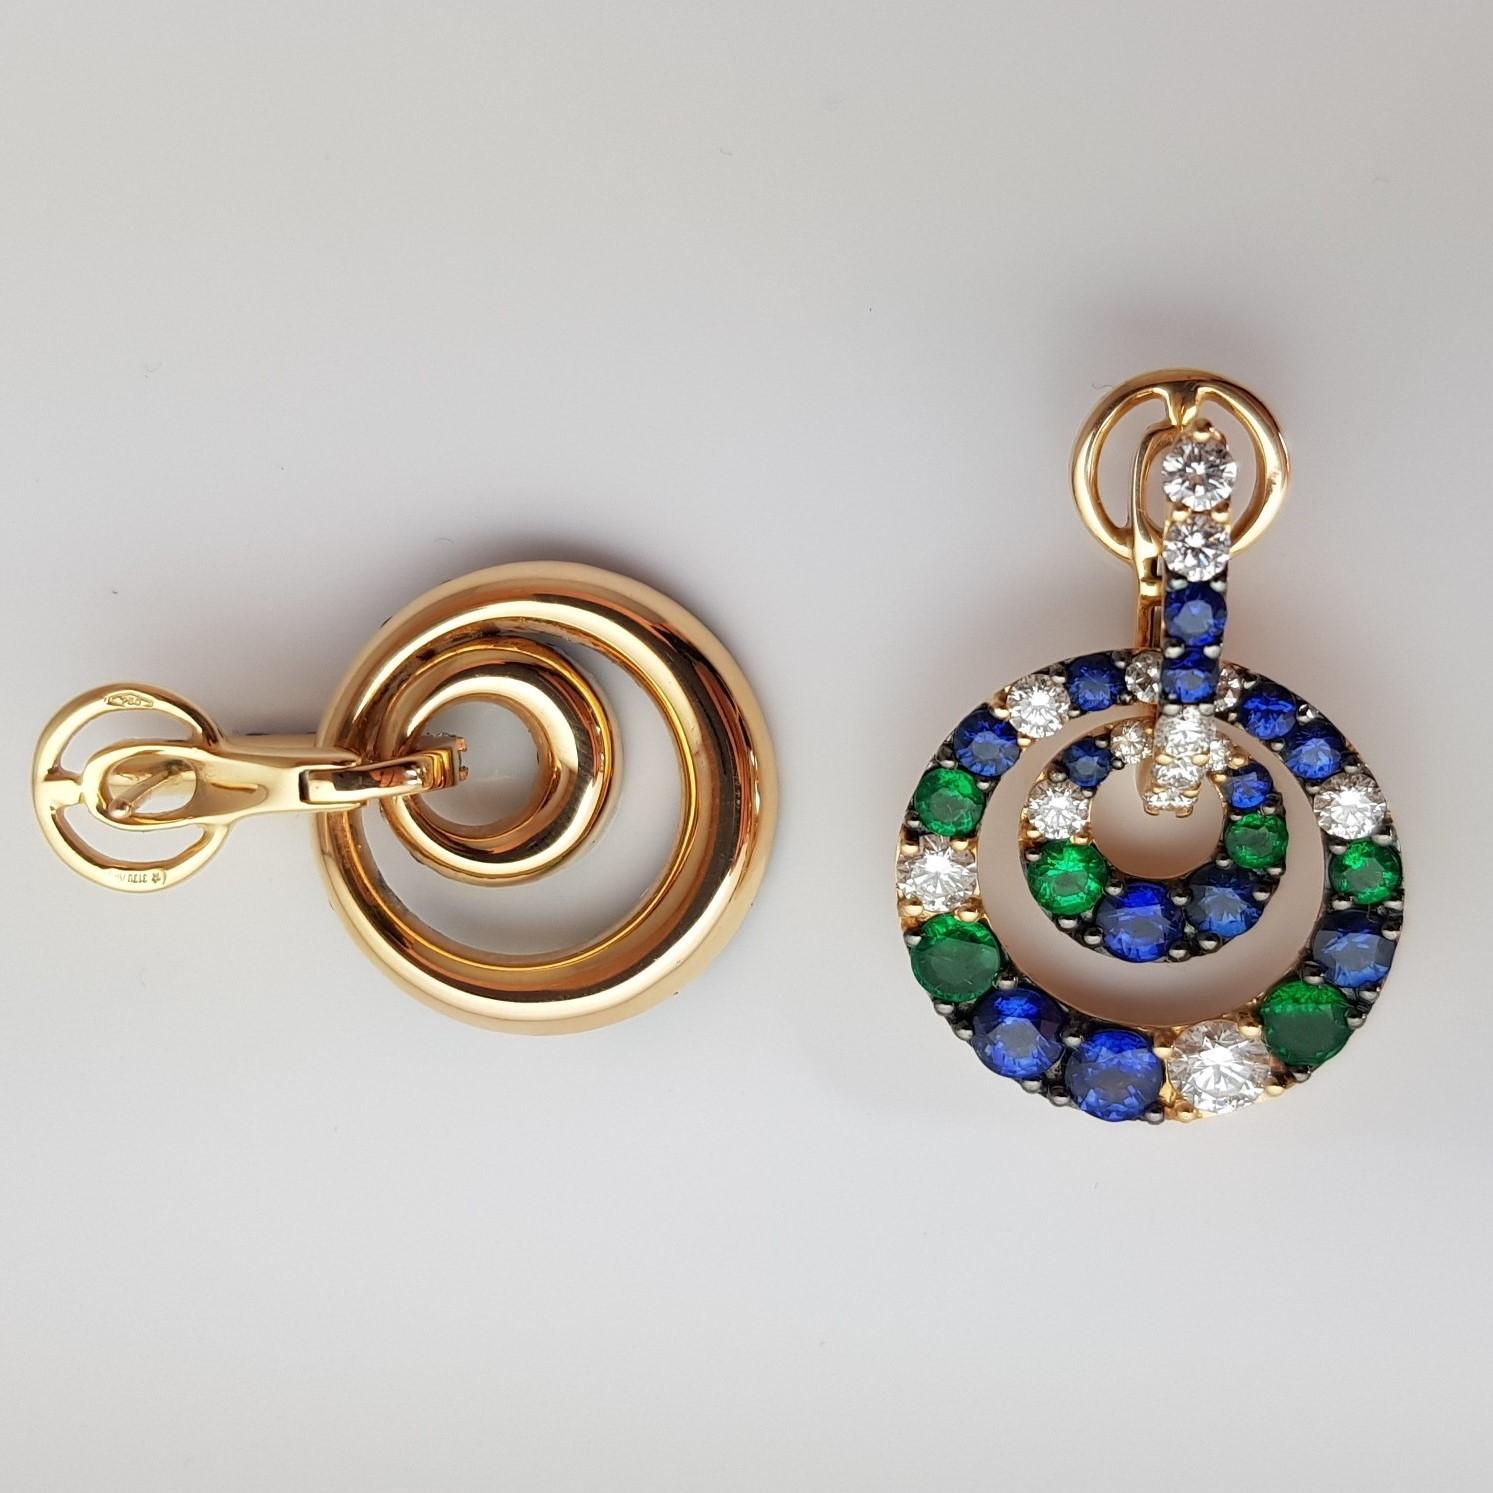 Double circle earrings set in 18K Yellow Gold embellished with 1.78 carats of Diamonds, 1.55 carats of Emeralds and 3.33 carats Blue Sapphires